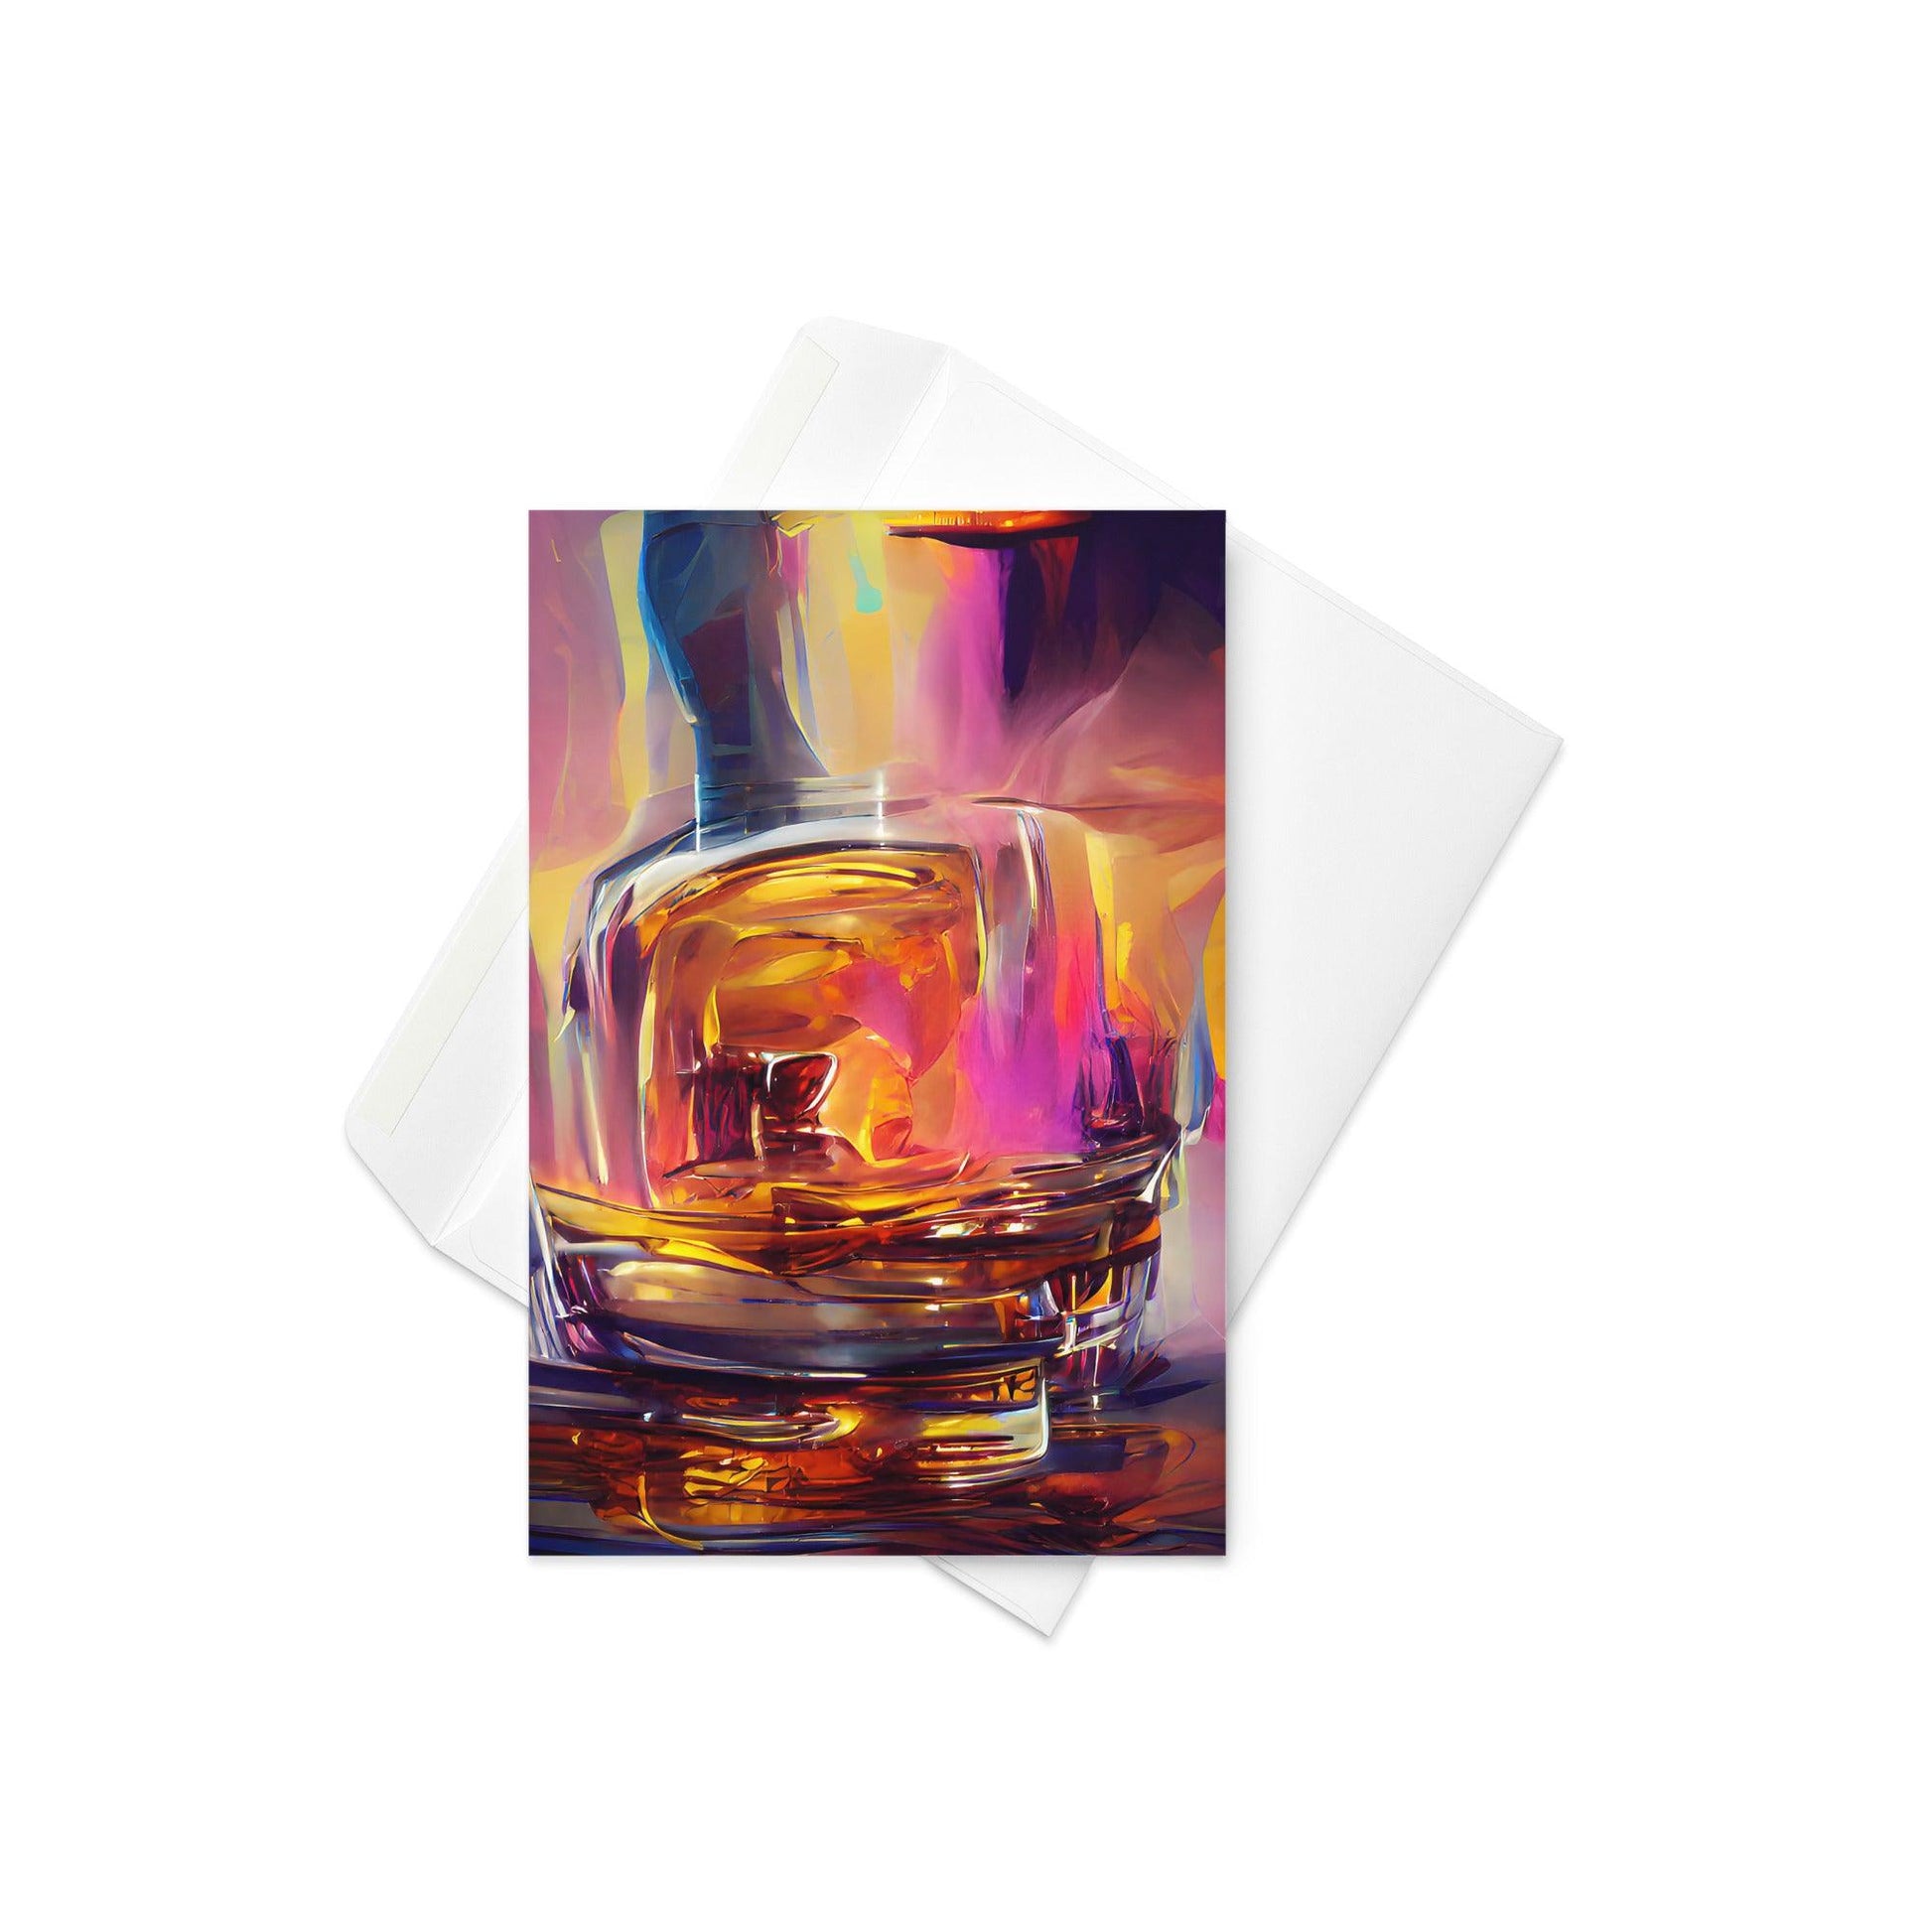 Double Whisky - Note Card - iSAW Company